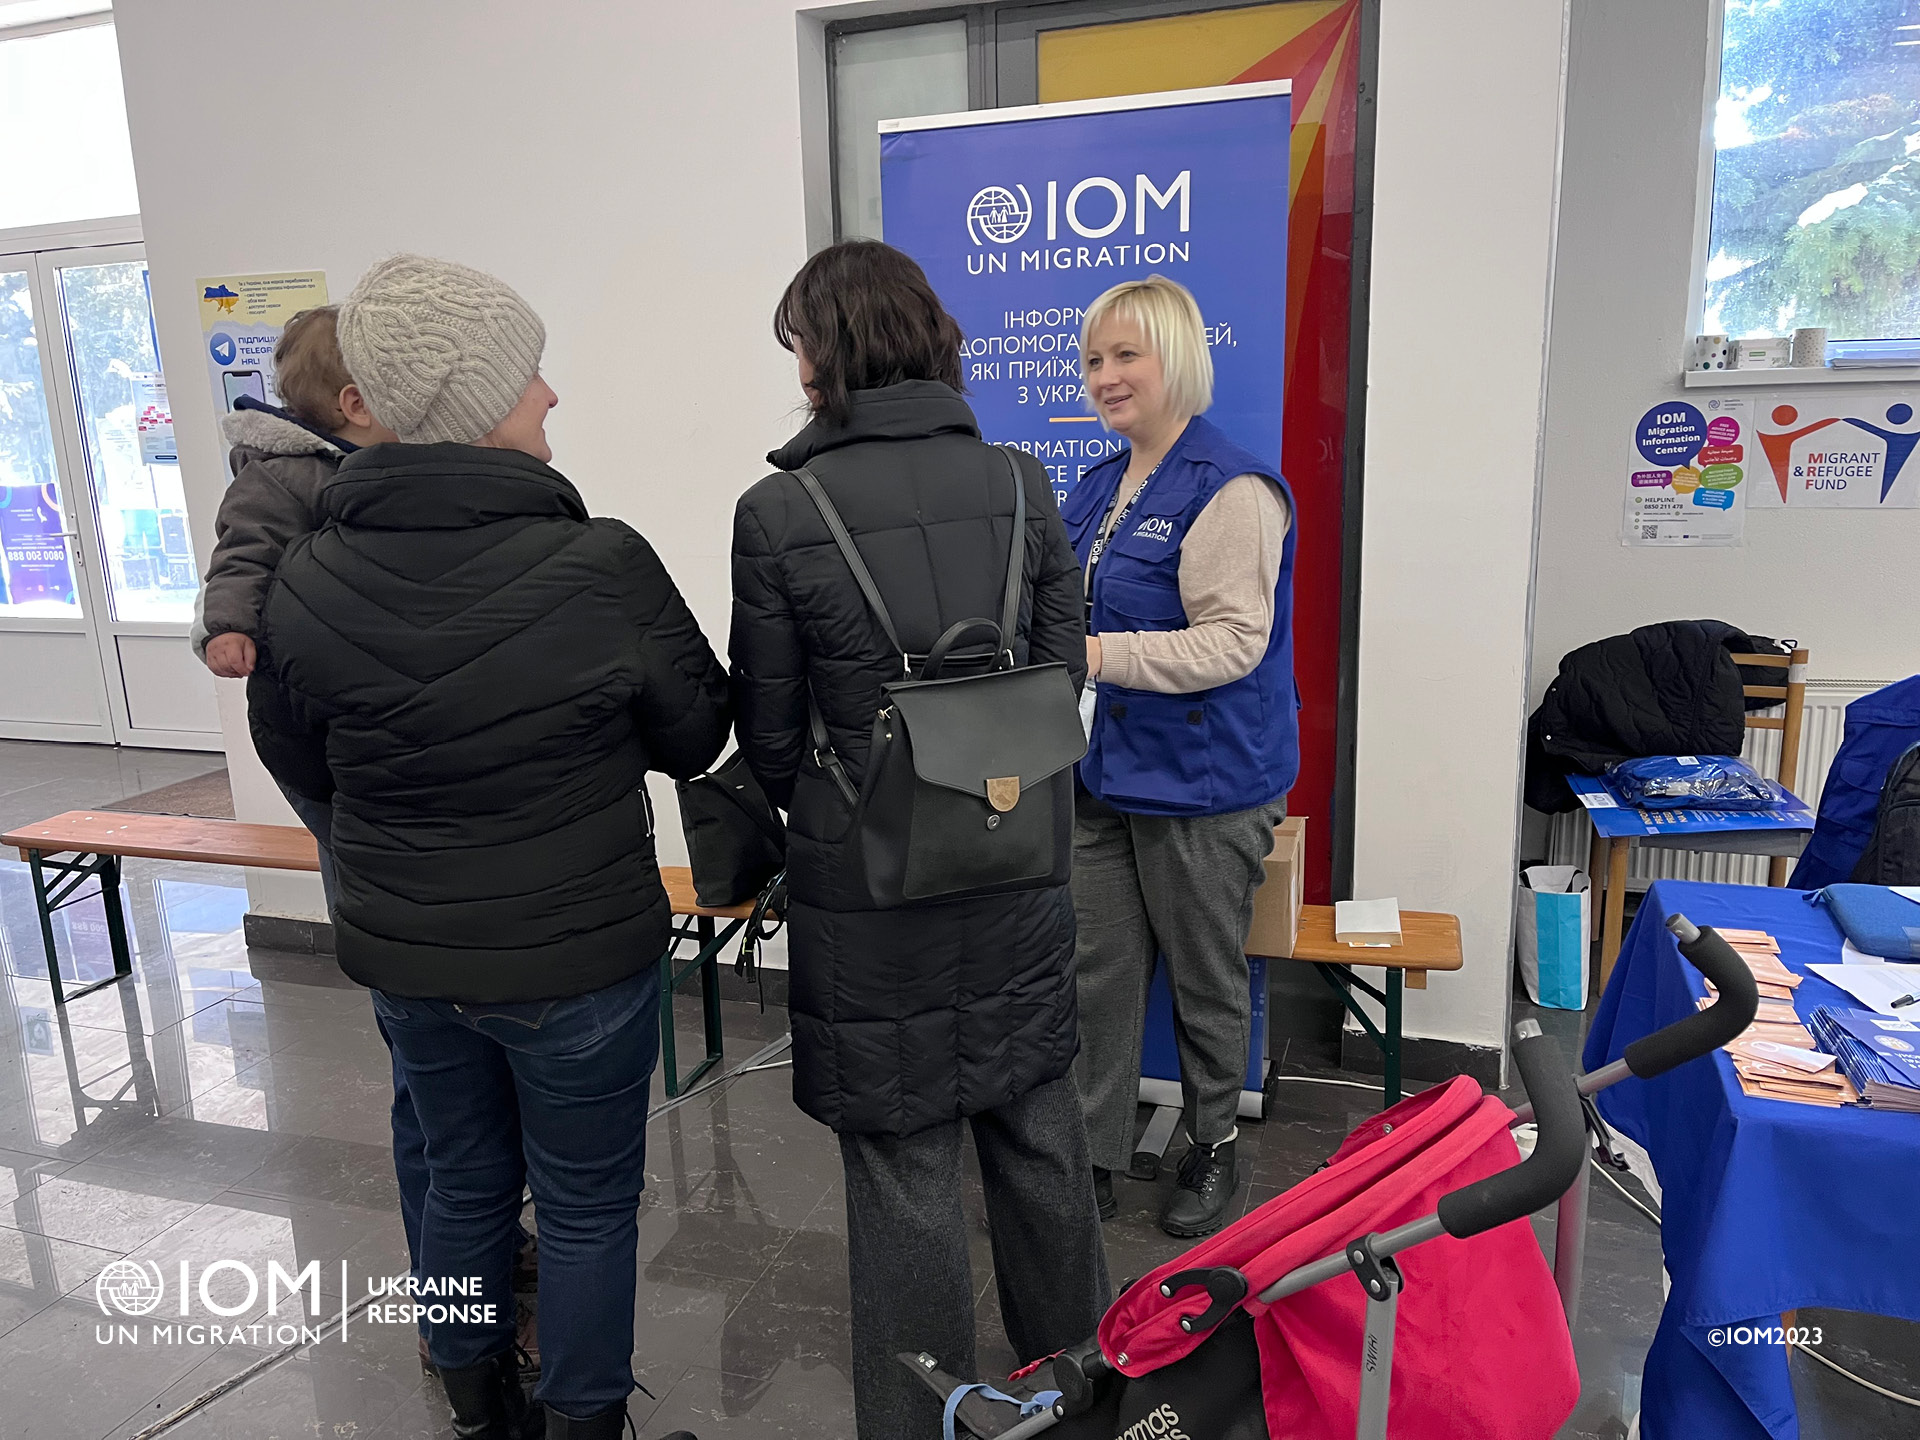 IOM frontline team responded to Natalia's questions about social guarantees for Ukrainian refugees in Slovakia. Photo © International Organization for Migration (IOM) 2023.